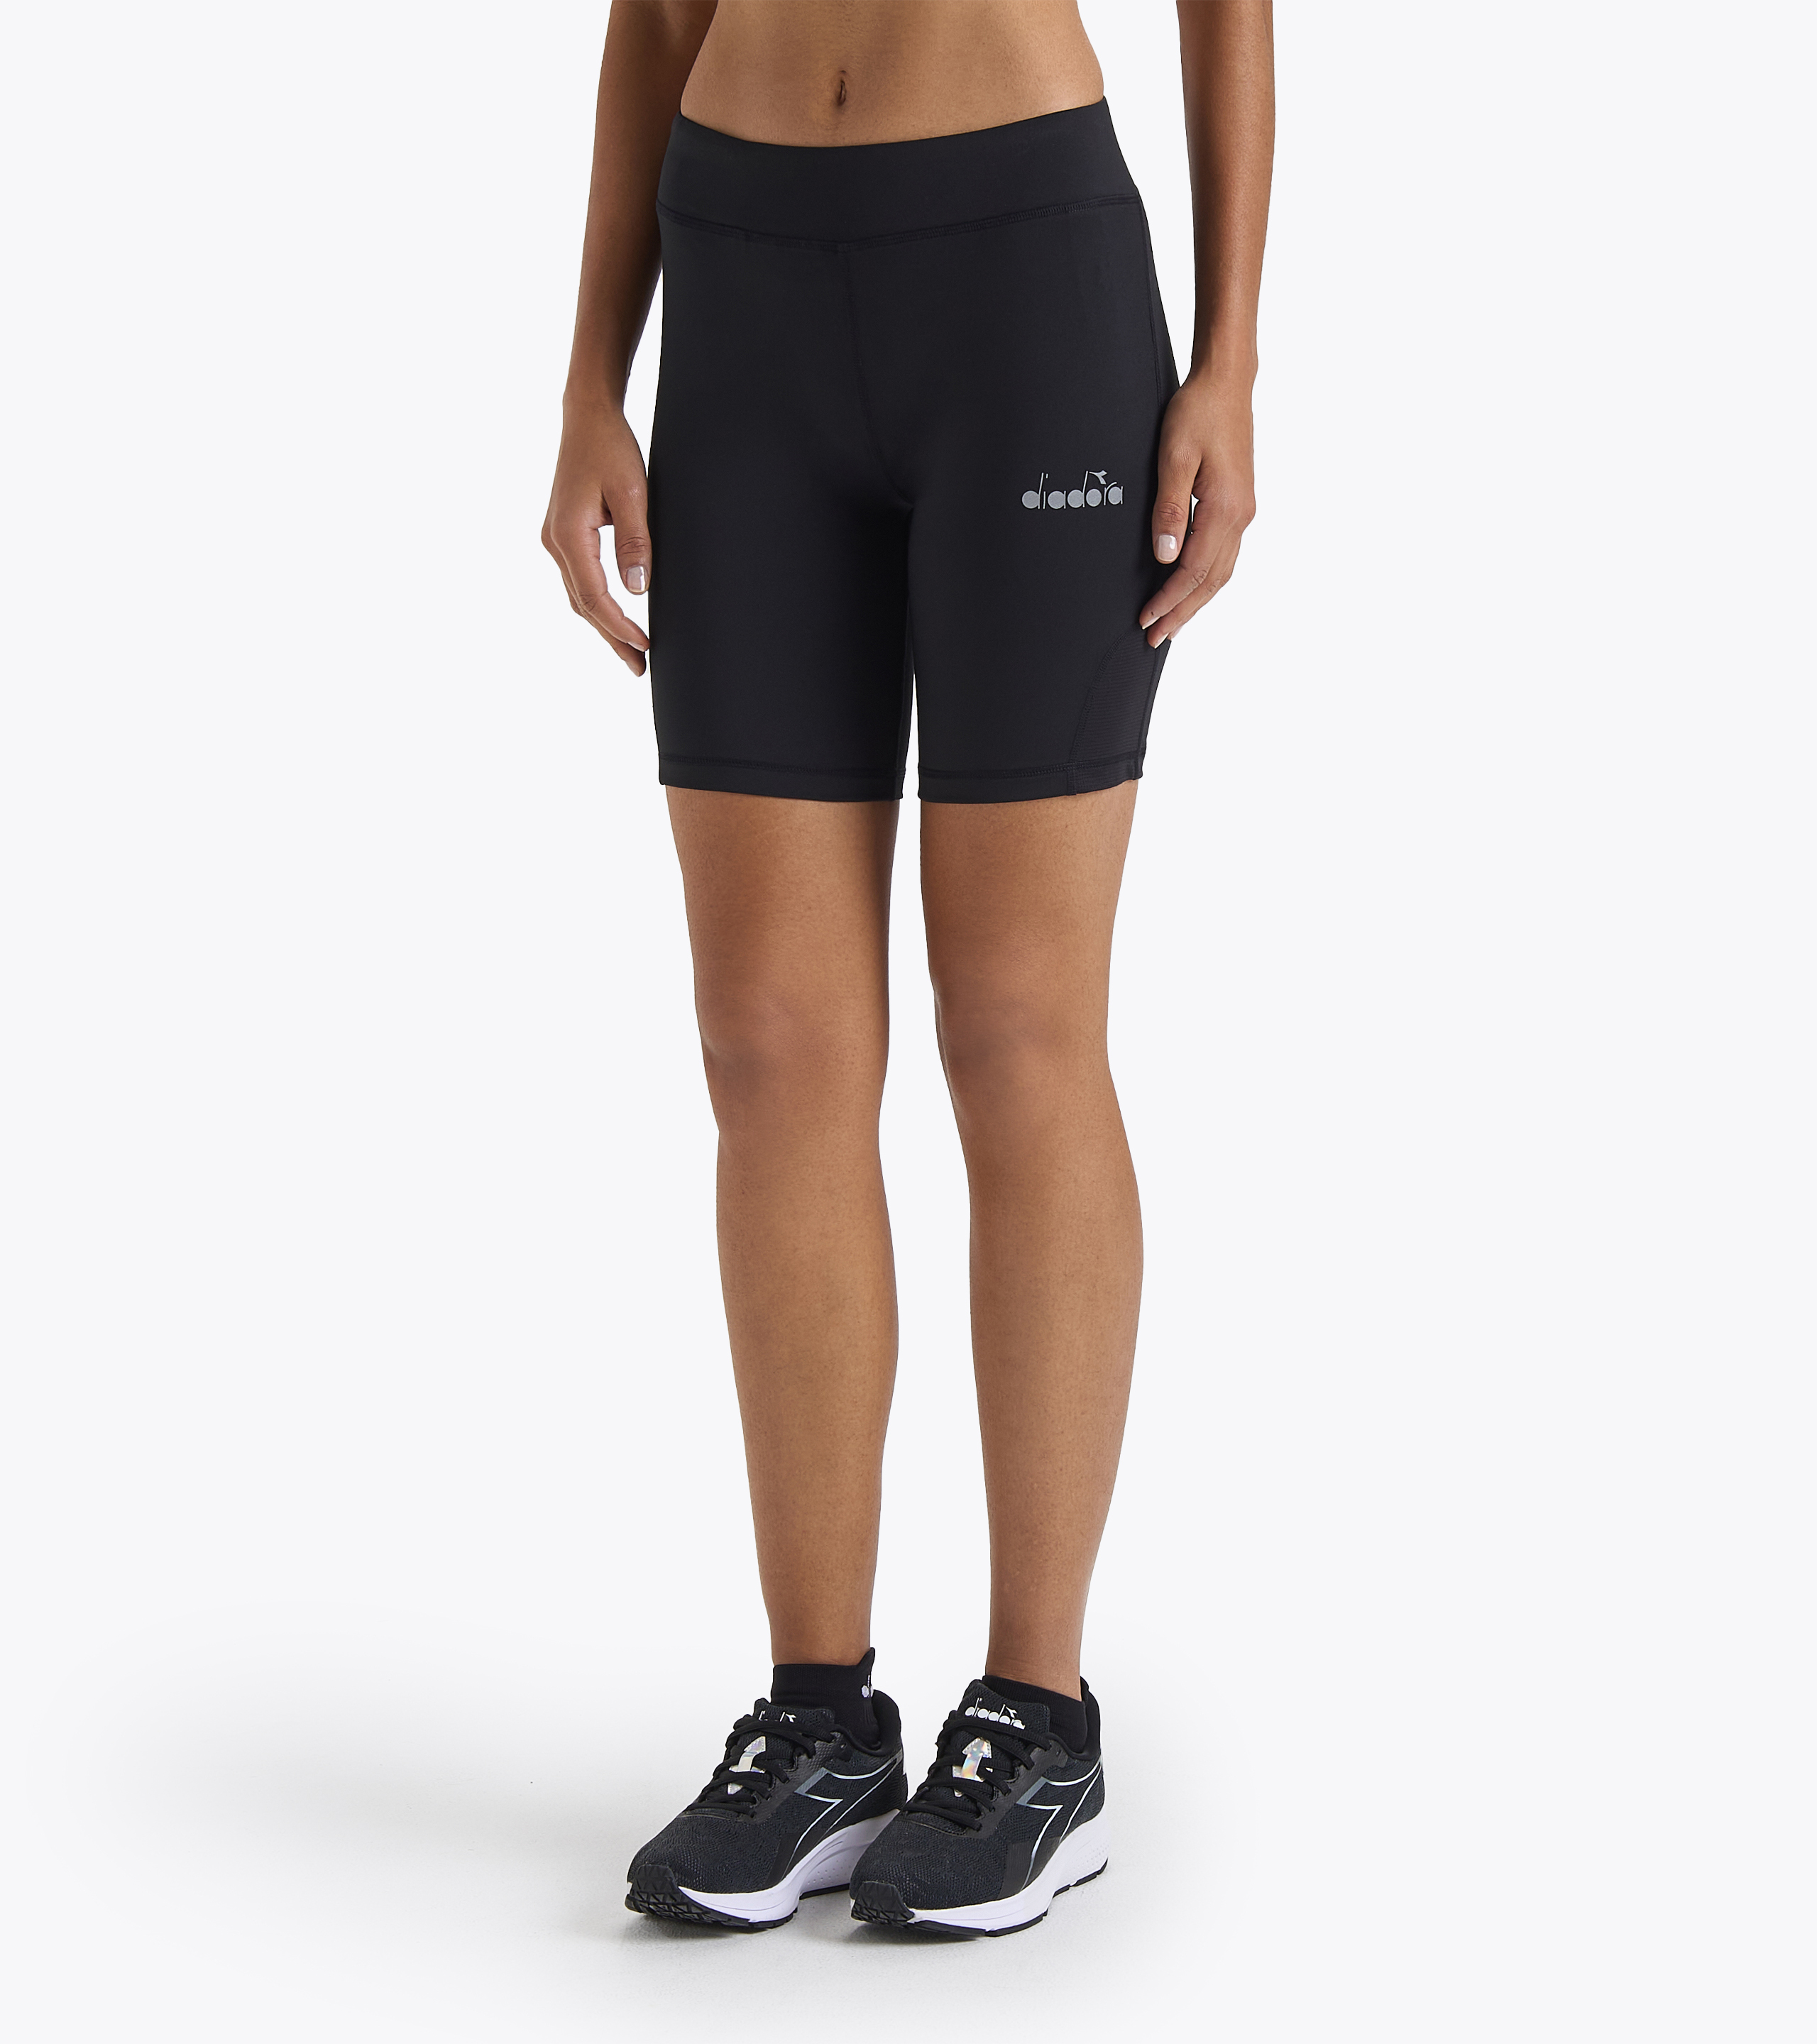 L. DOUBLE LAYER SHORTS BE ONE Running shorts - Women - Diadora Online Store  CA